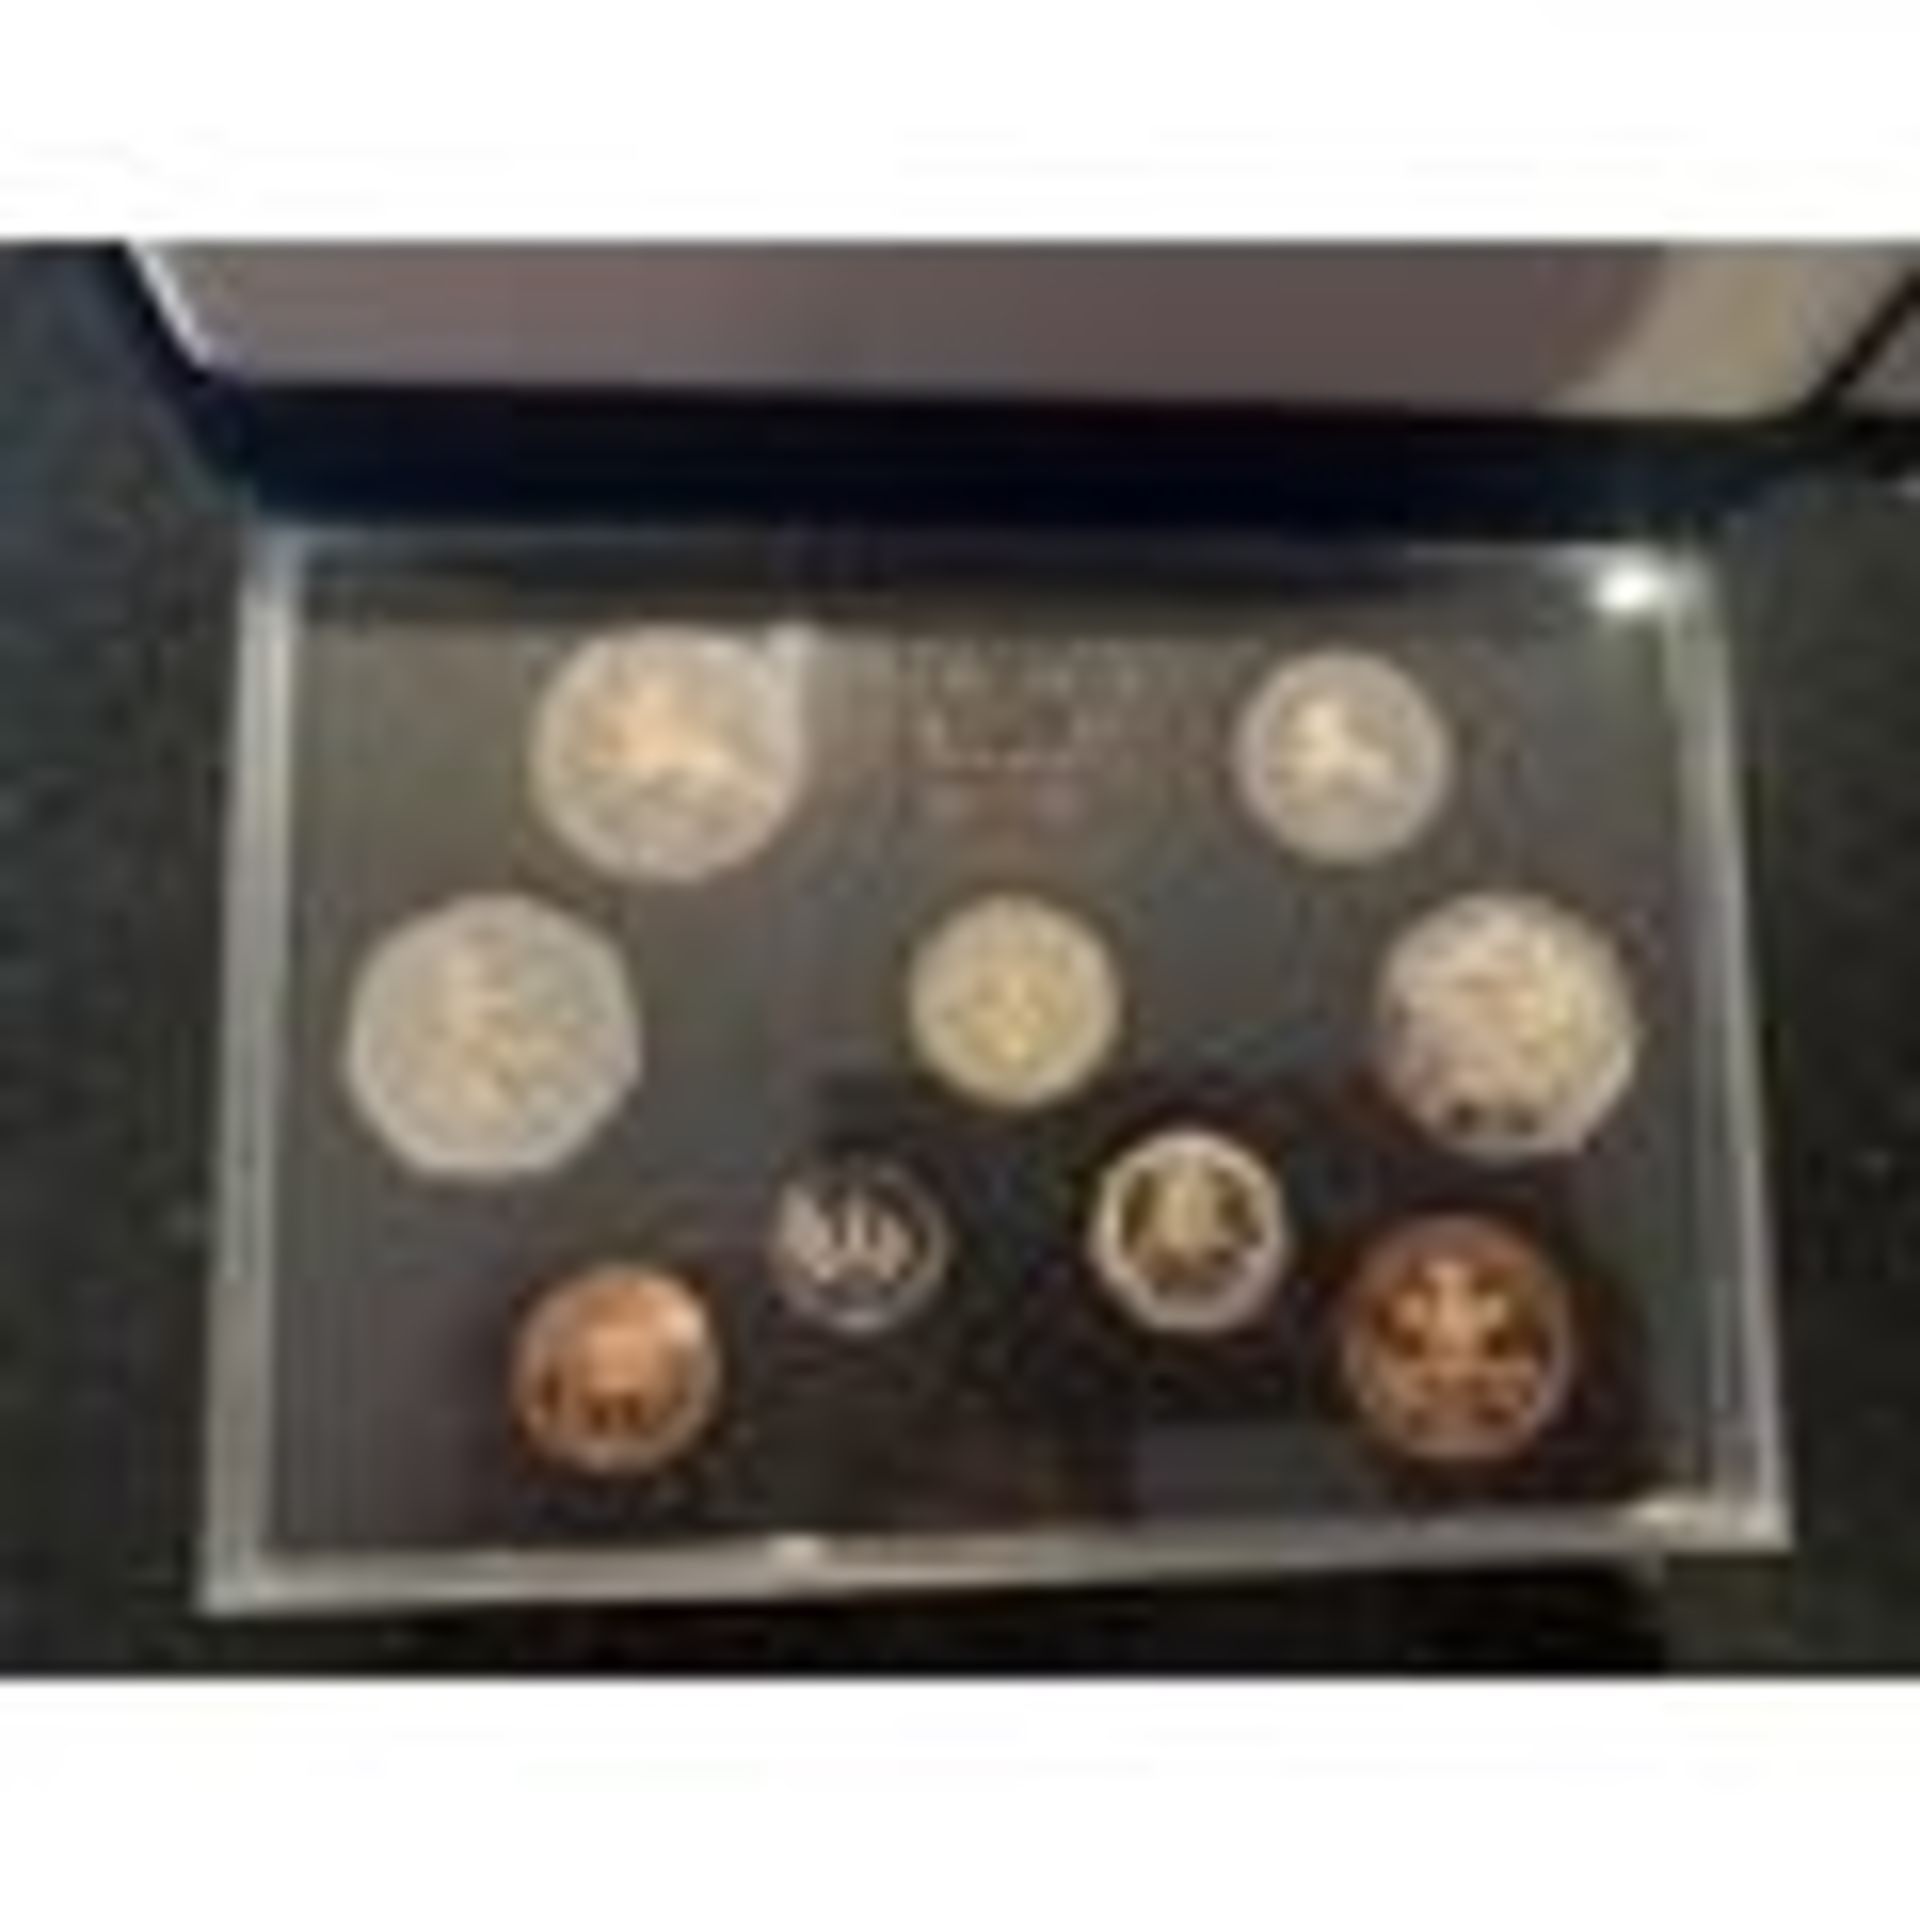 A UK 1992 PROOF COIN COLLECTION . BOXED WITH COA - Image 3 of 3